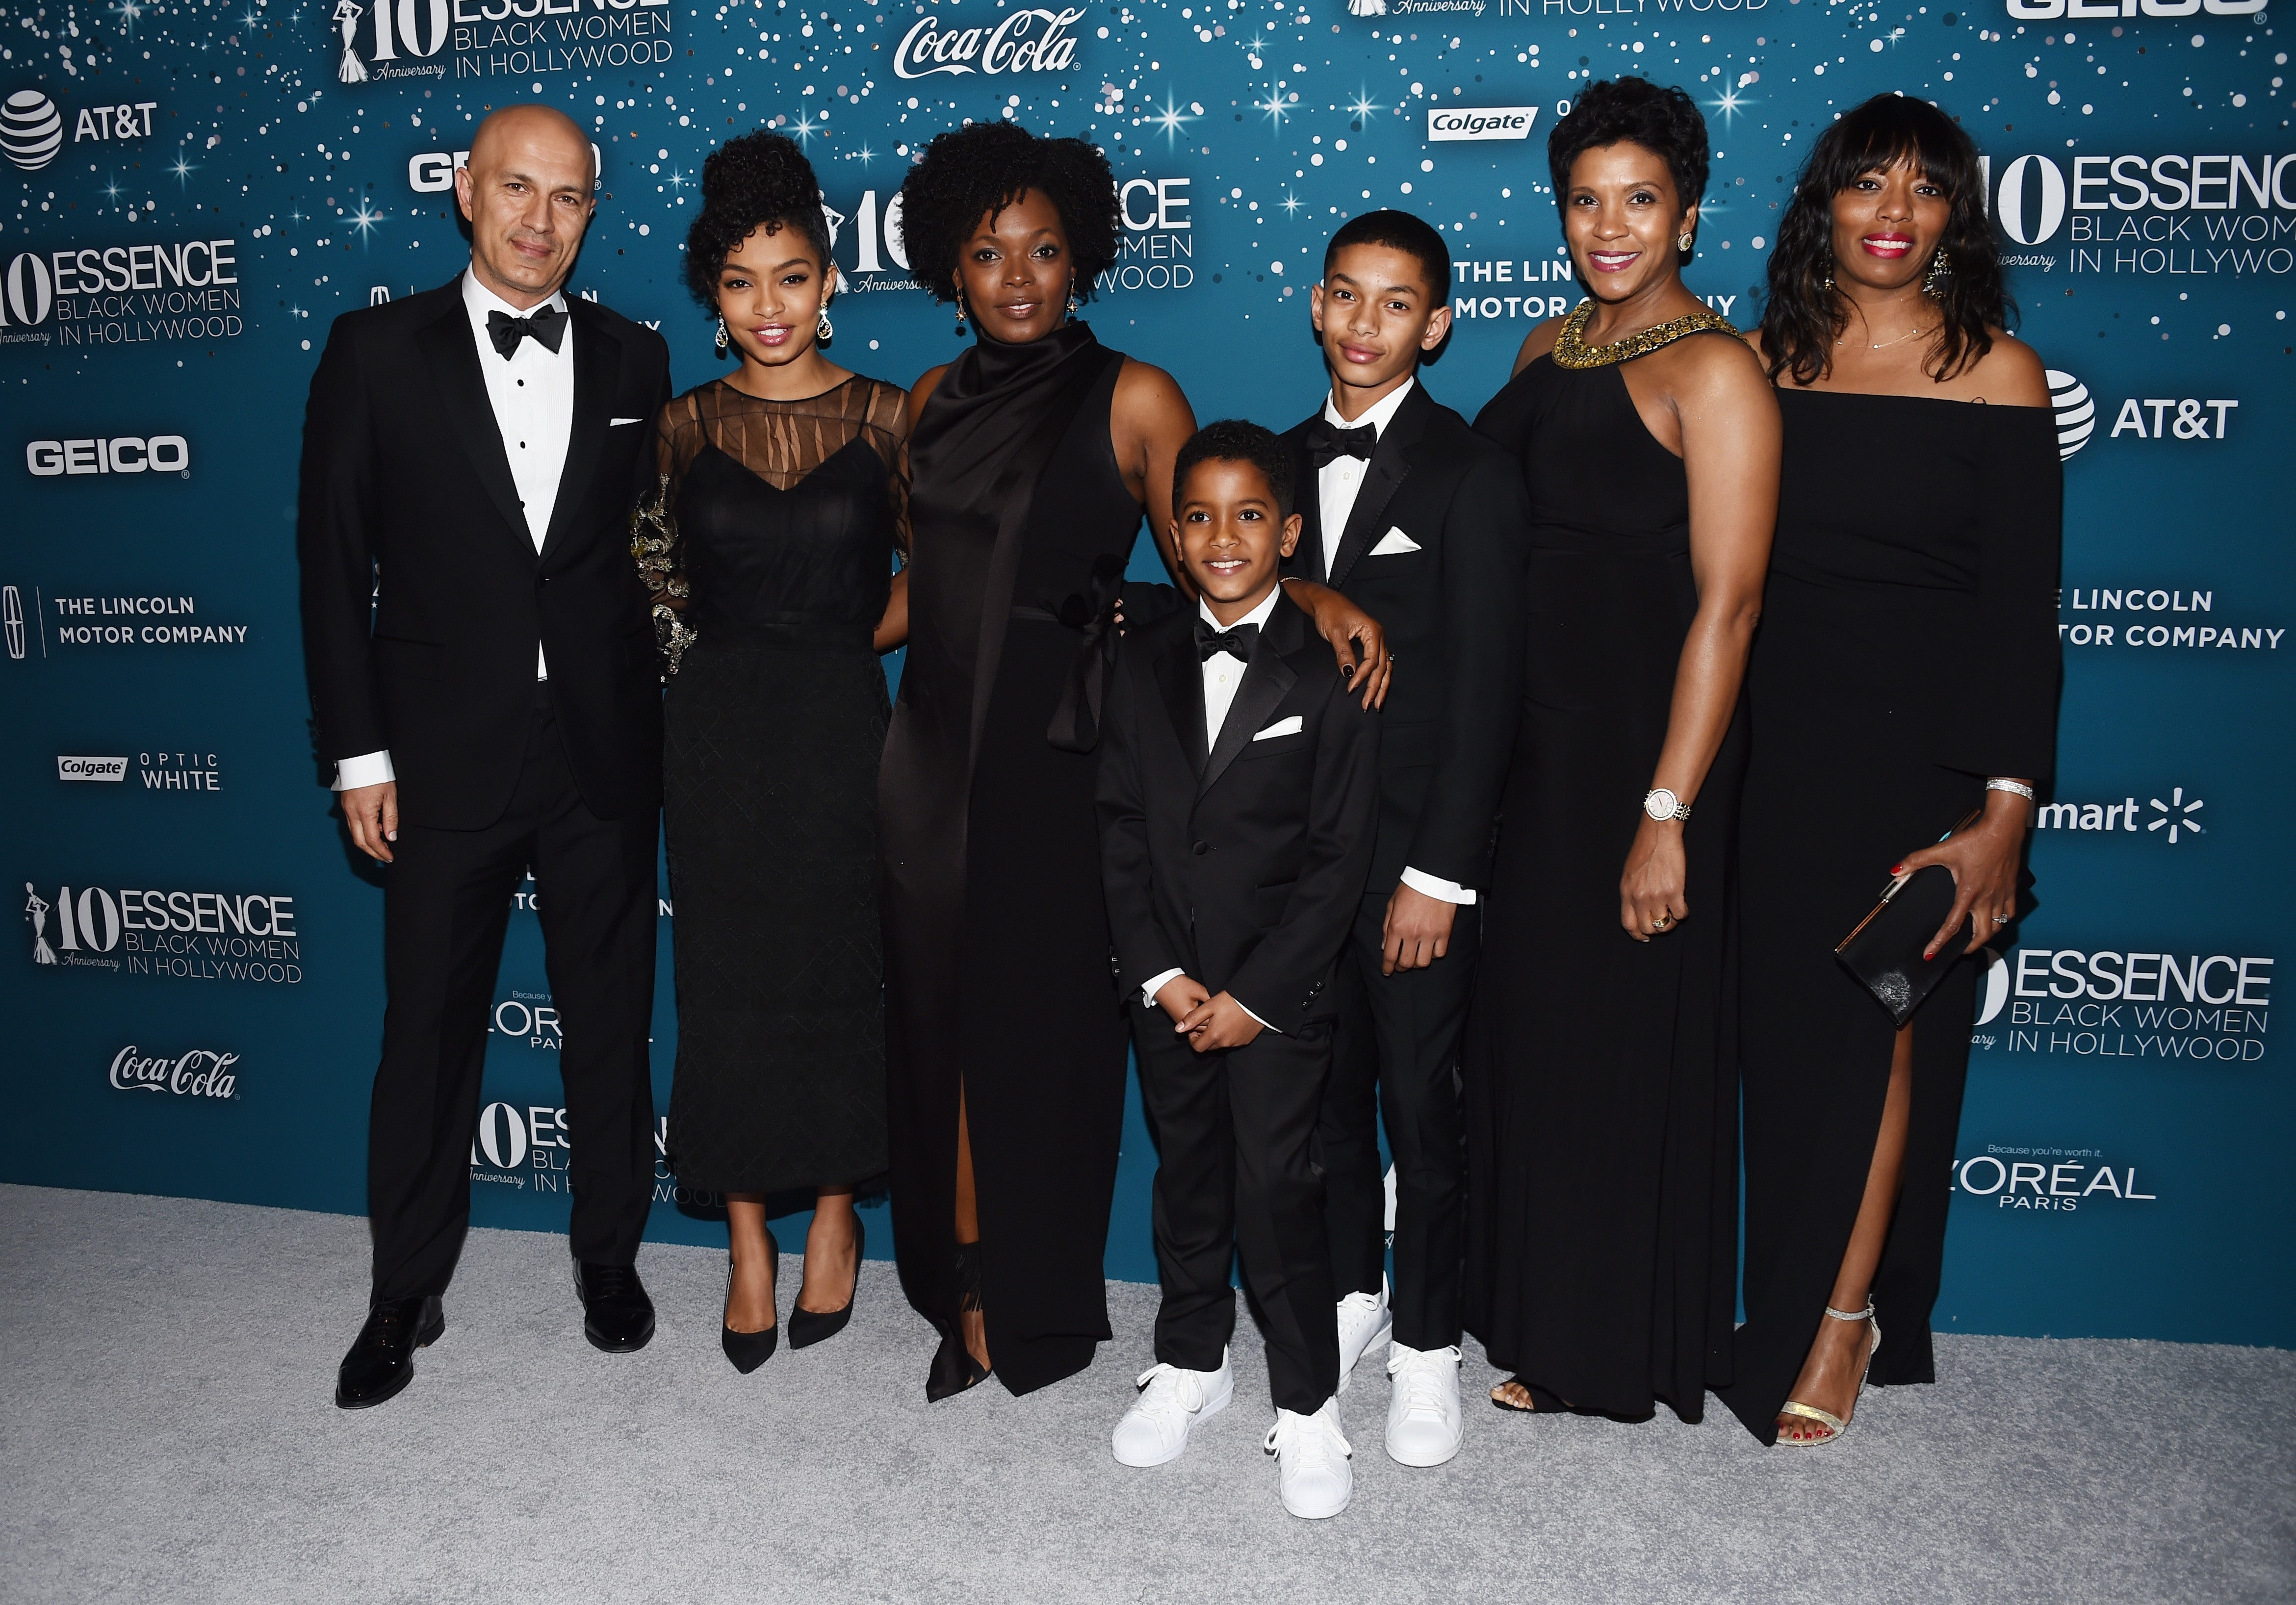 ESSENCE's 10th Annual Black Women in Hollywood Awards To Air On OWN